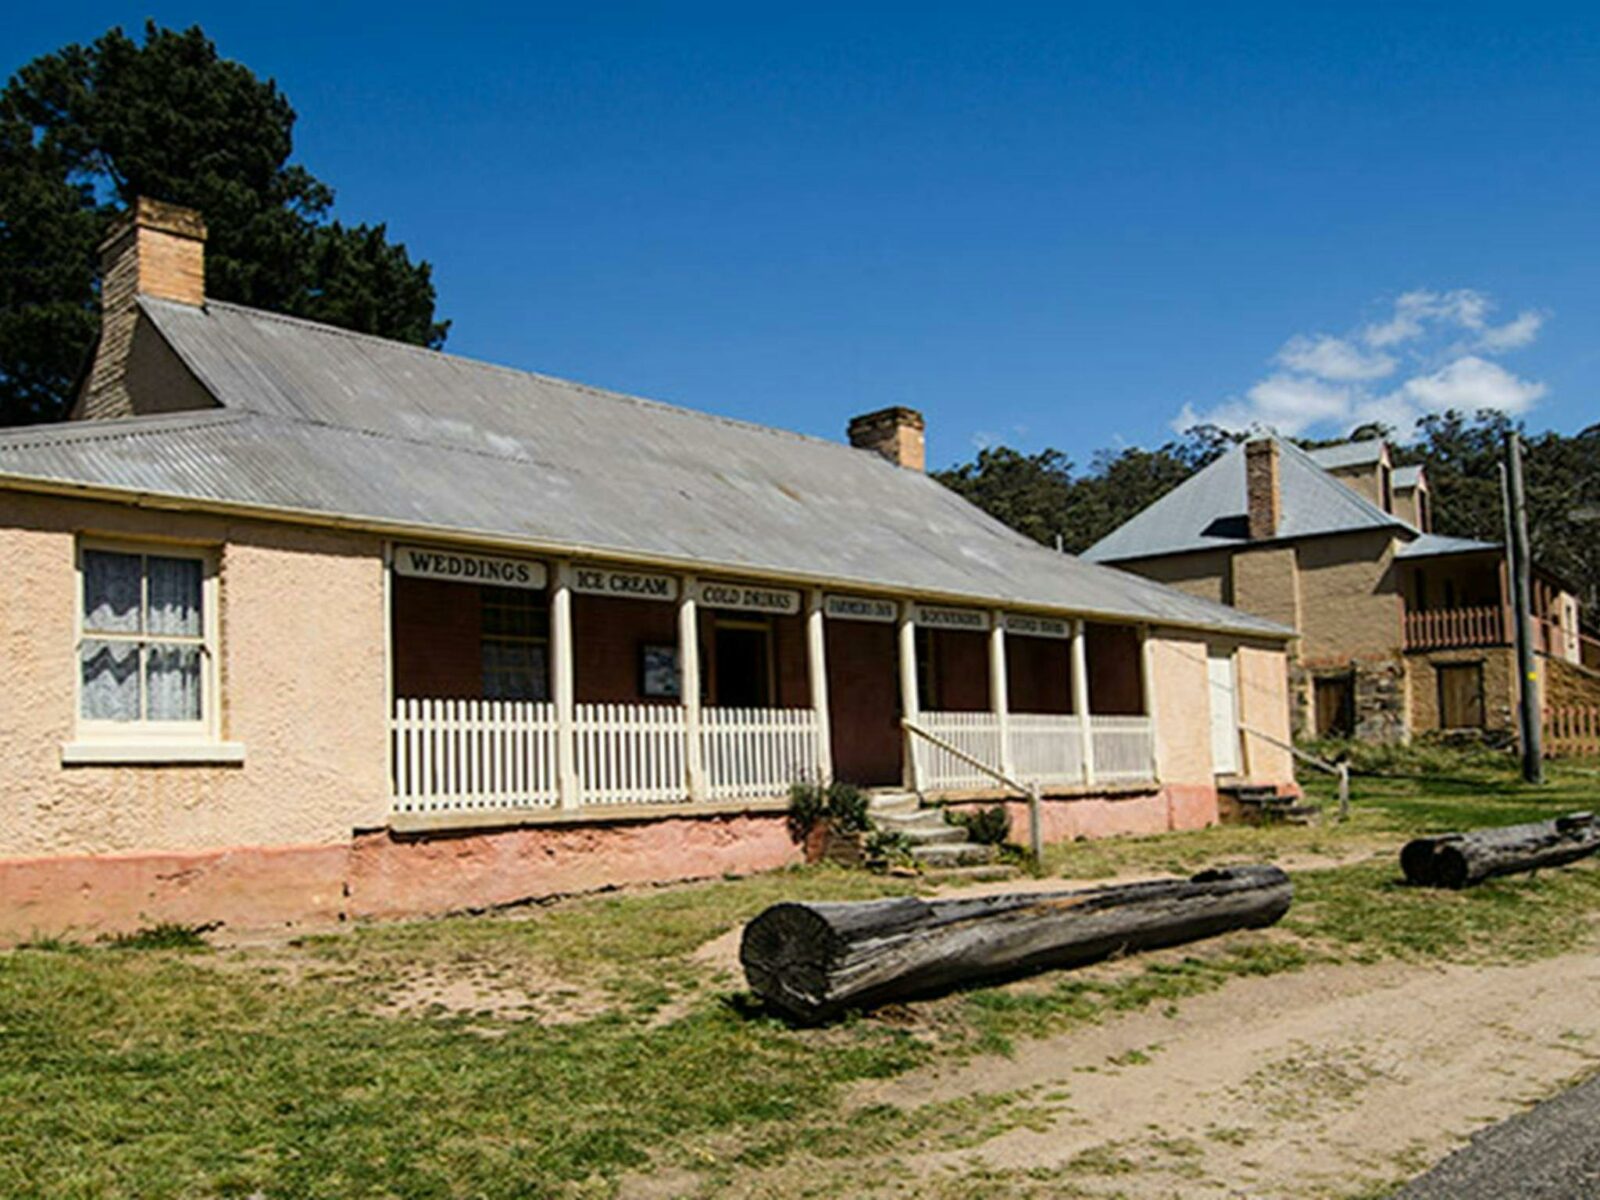 Hartley Visitor Centre, Hartley Historic Site. Photo: John Spencer © OEH